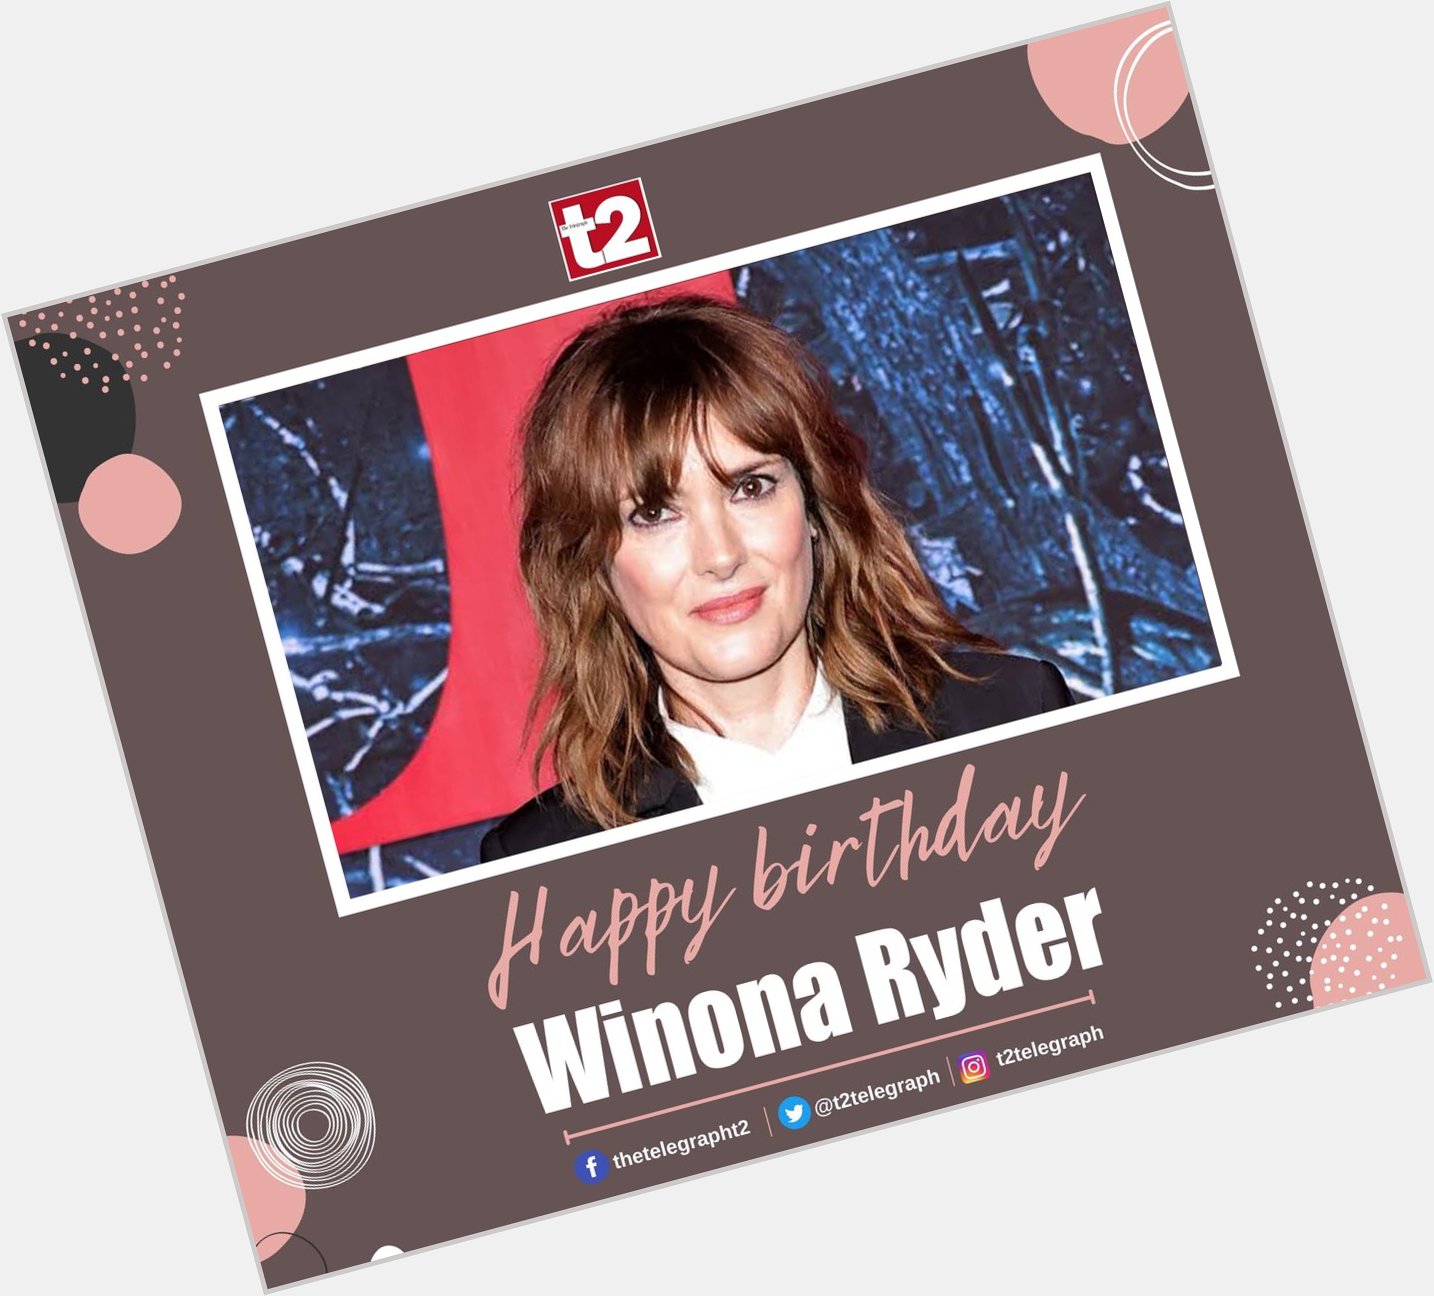 She continues to win hearts even now as Joyce in Stranger Things. Happy birthday Winona Ryder 